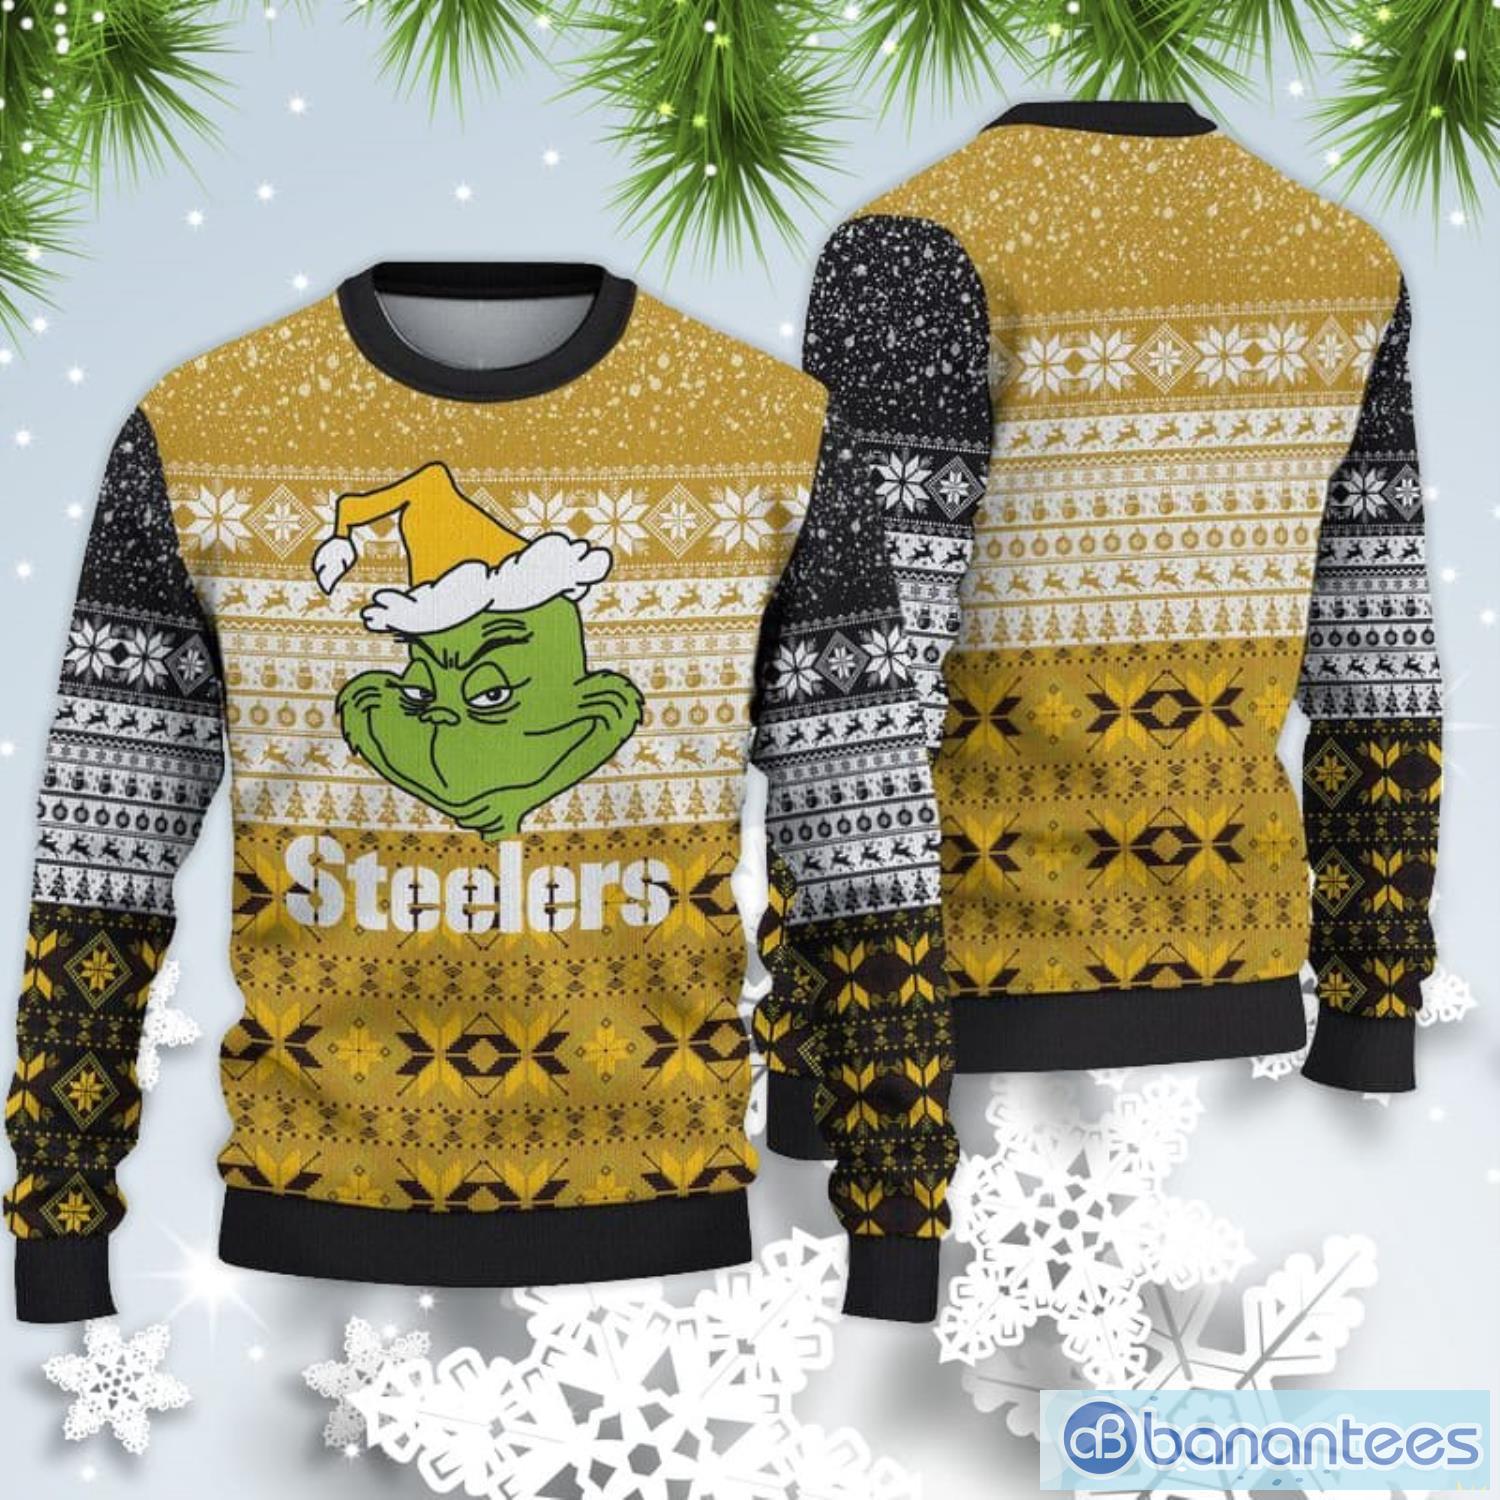 Pittsburgh Steelers Christmas Grinch Sweater For Fans Product Photo 1